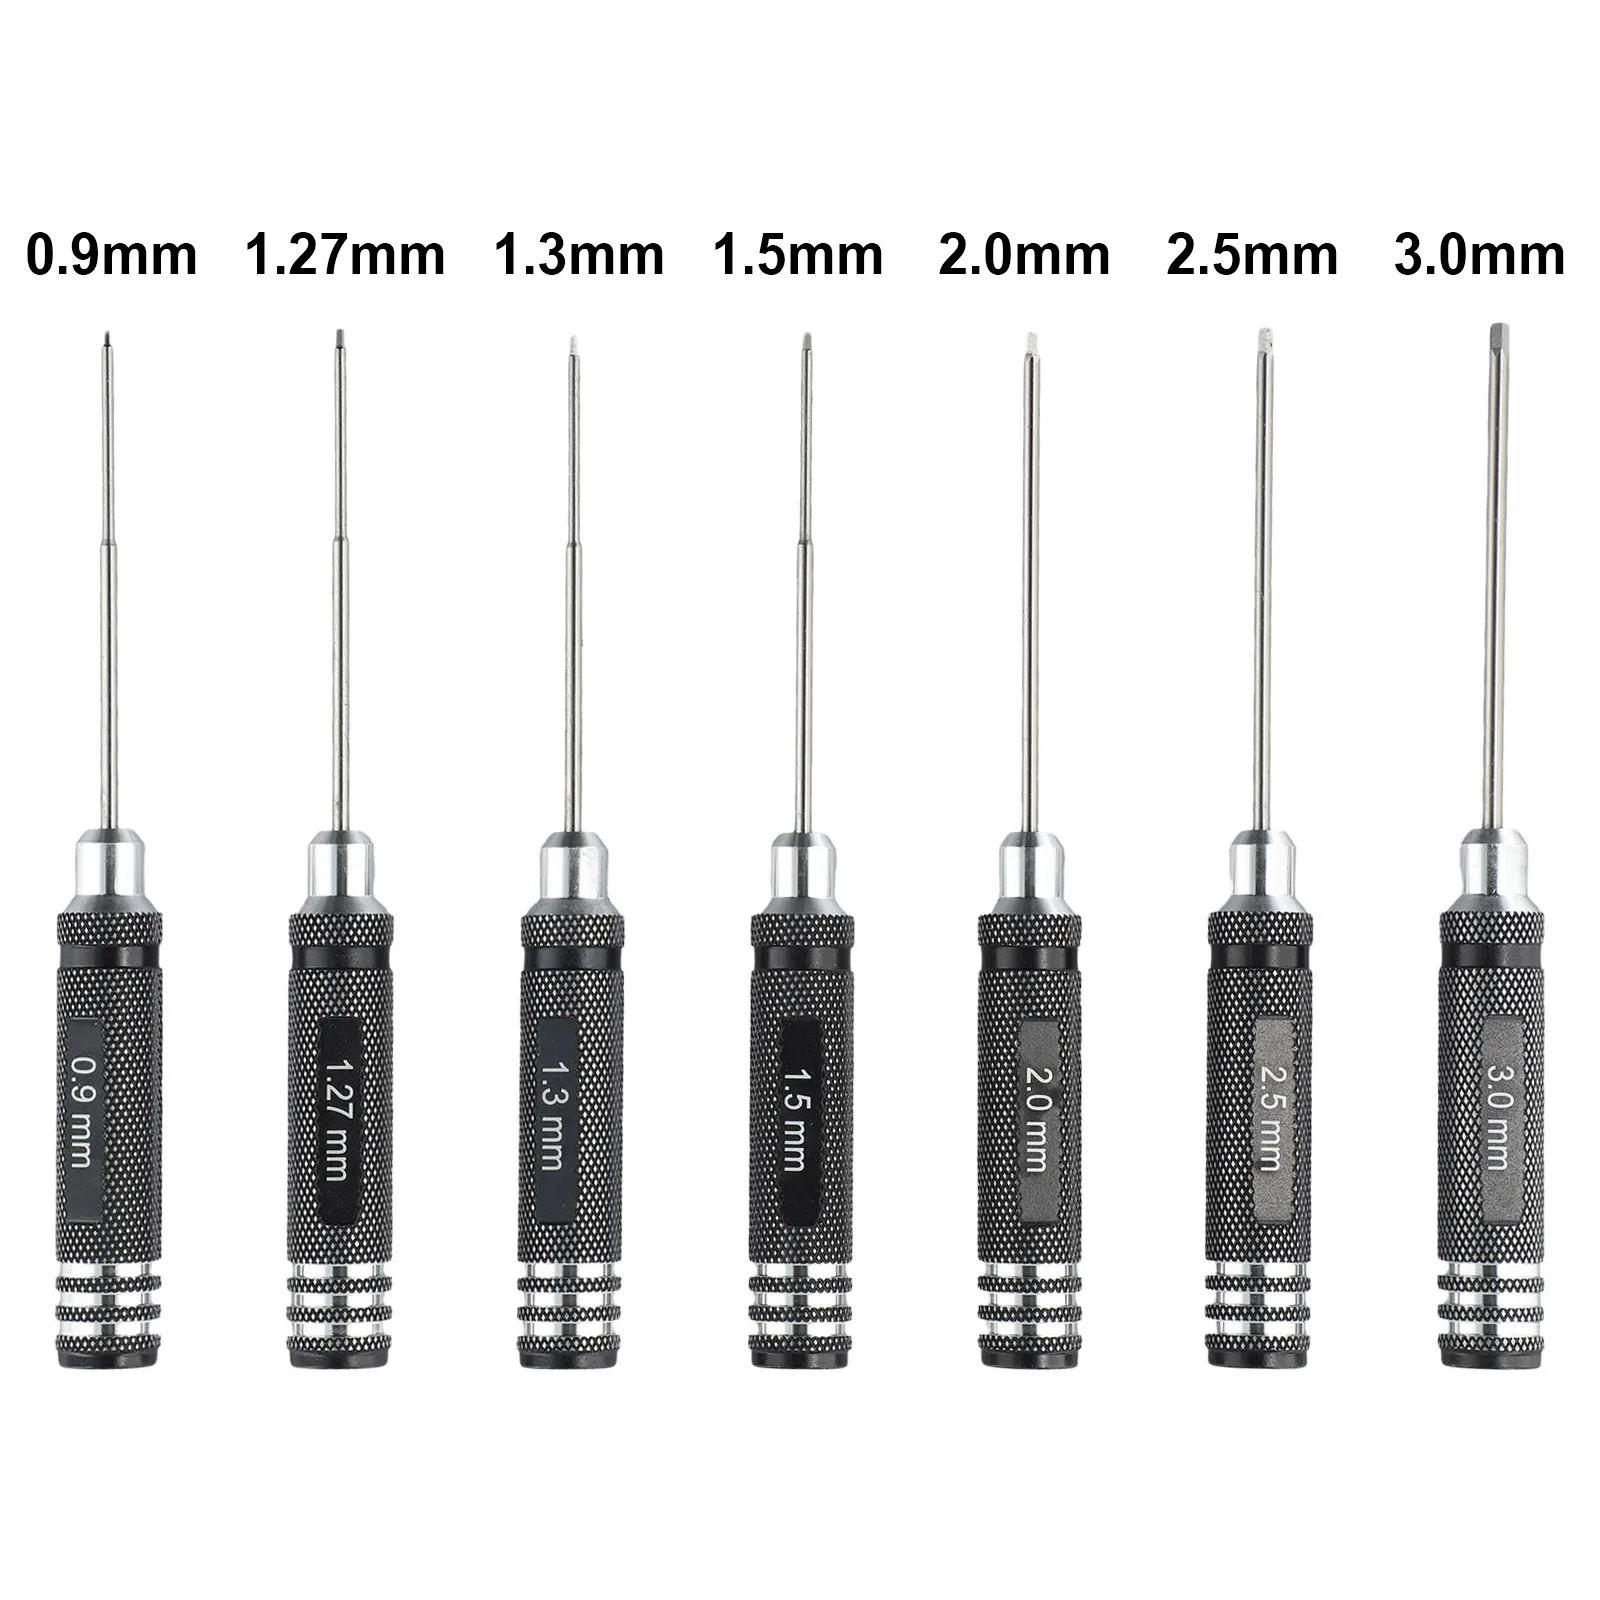 

Wrench Screwdrivers Hex Screwdriver Repair Tools Screw Driver Screwdrivers Aircraft Model For Helicopter For RC Model